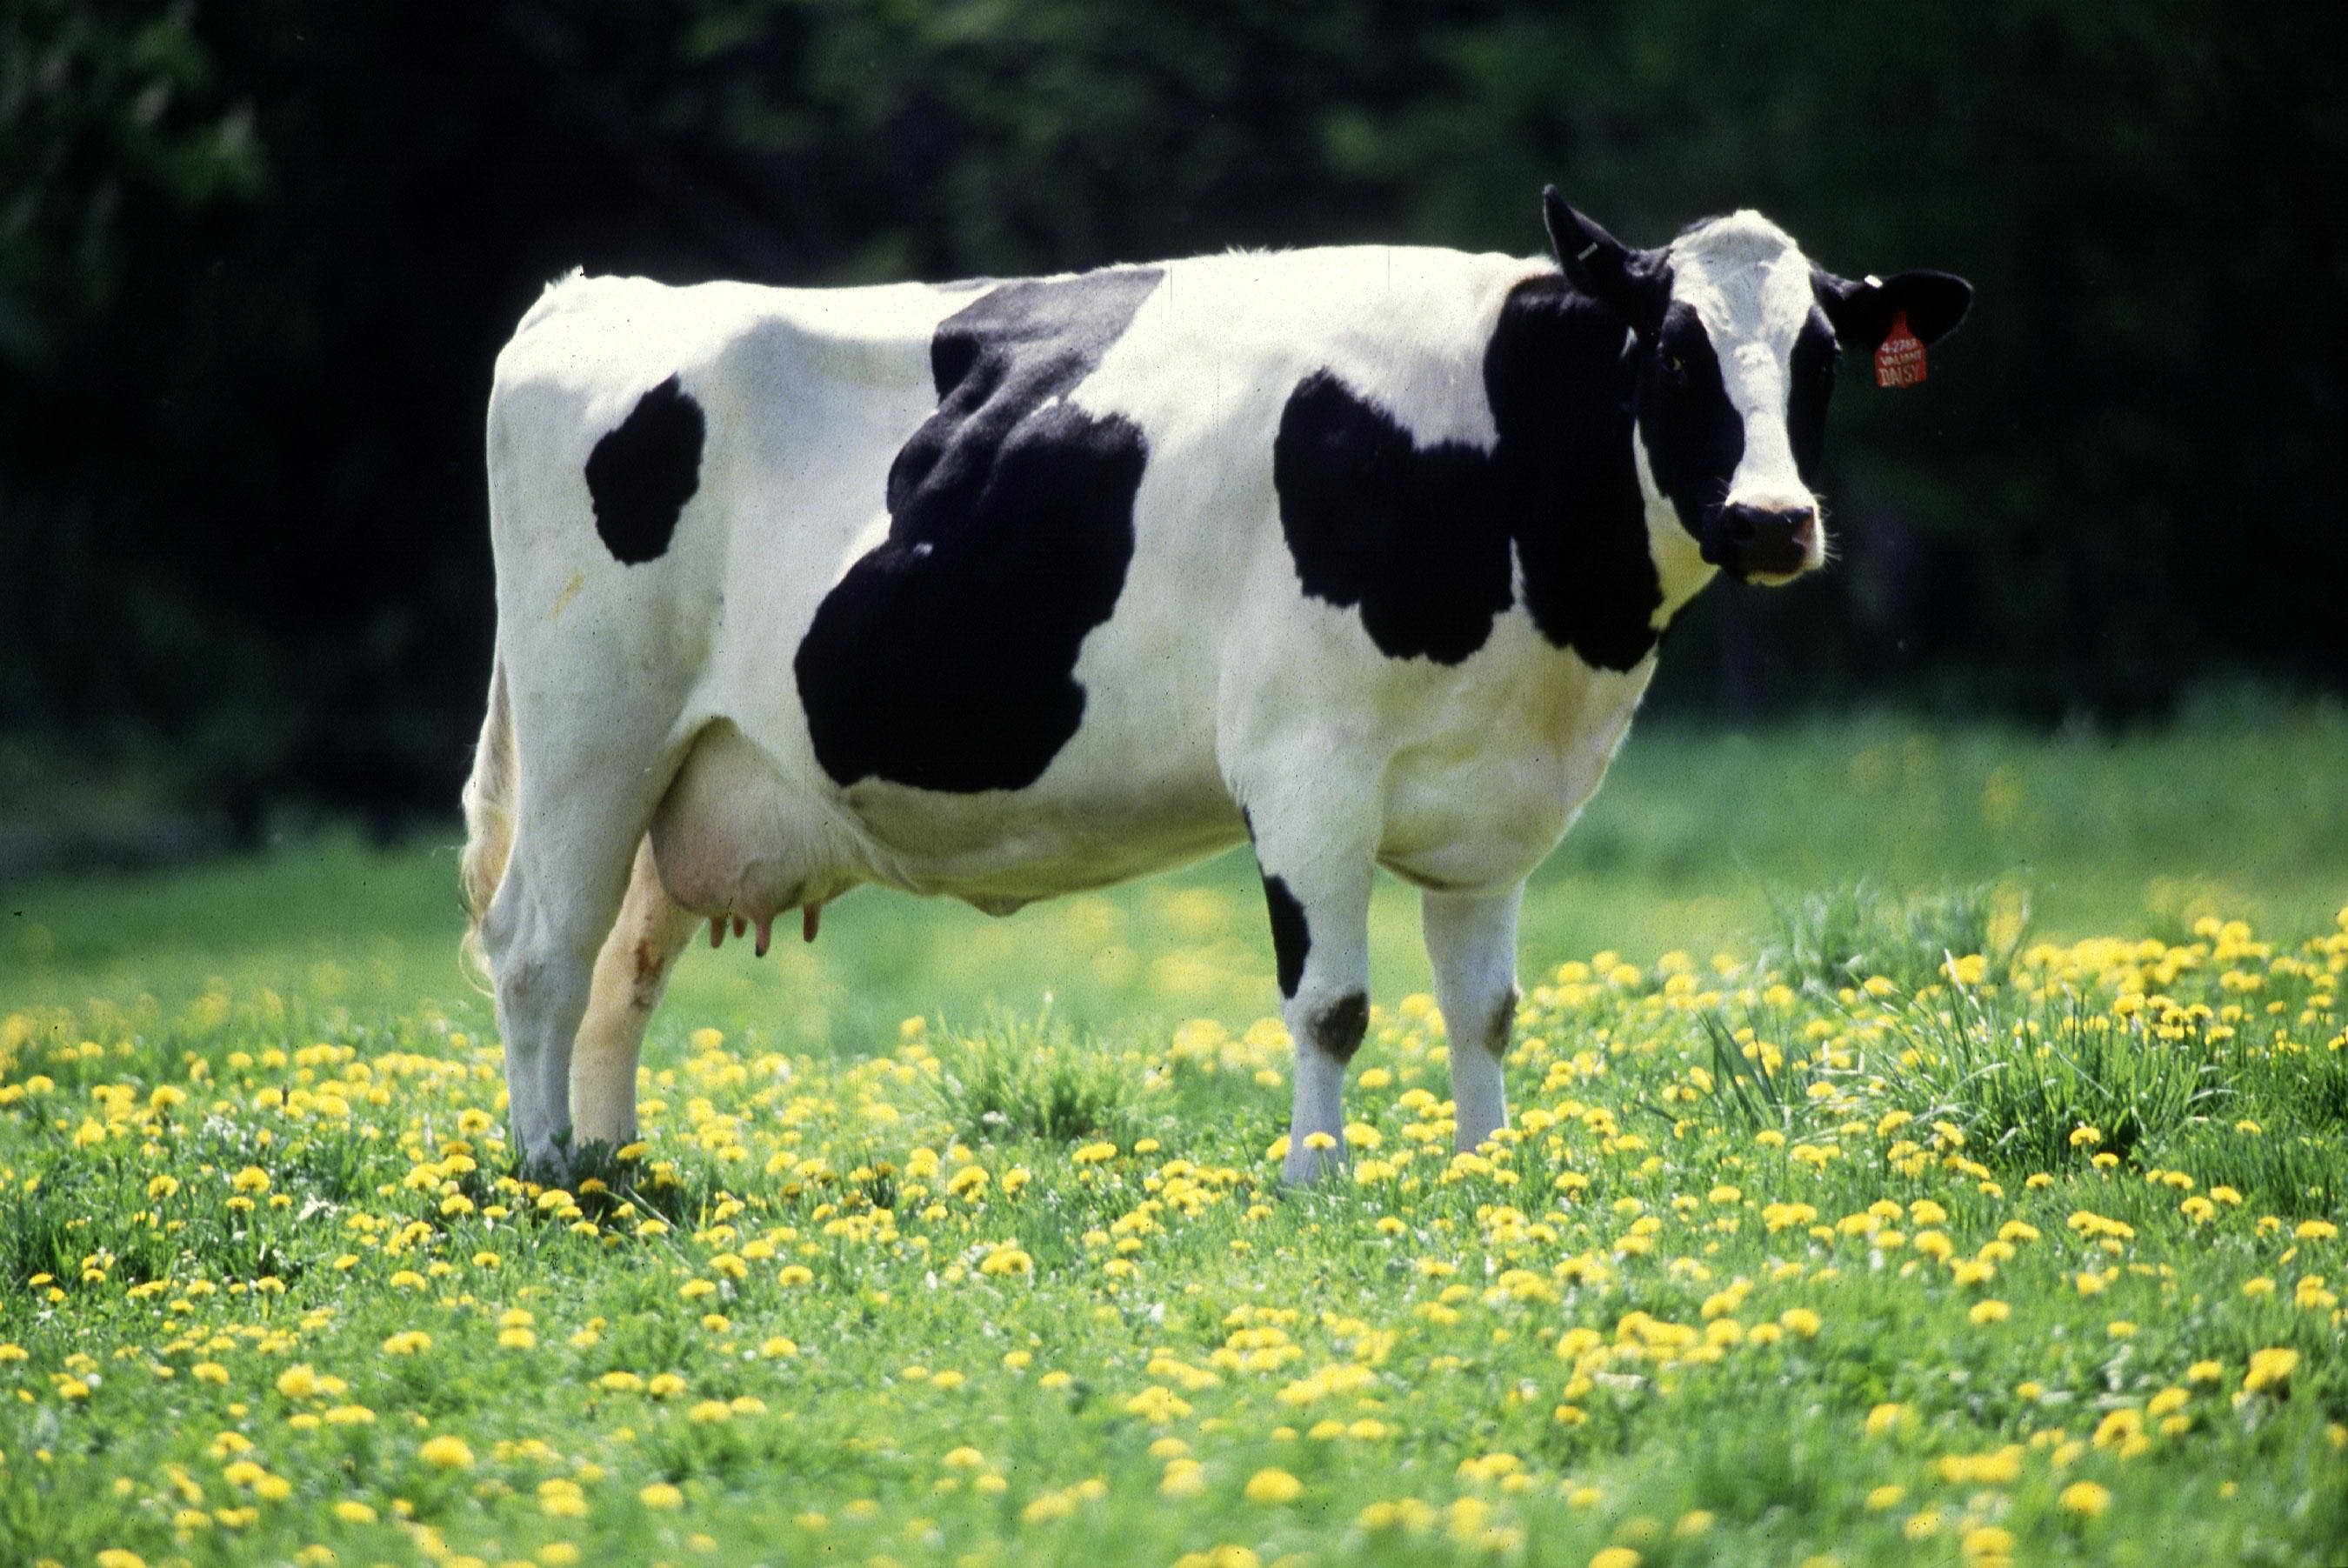 One animal unit is considered to be one mature cow that weighs 450 kg, needs roughly about 11 kgs of forage per day.